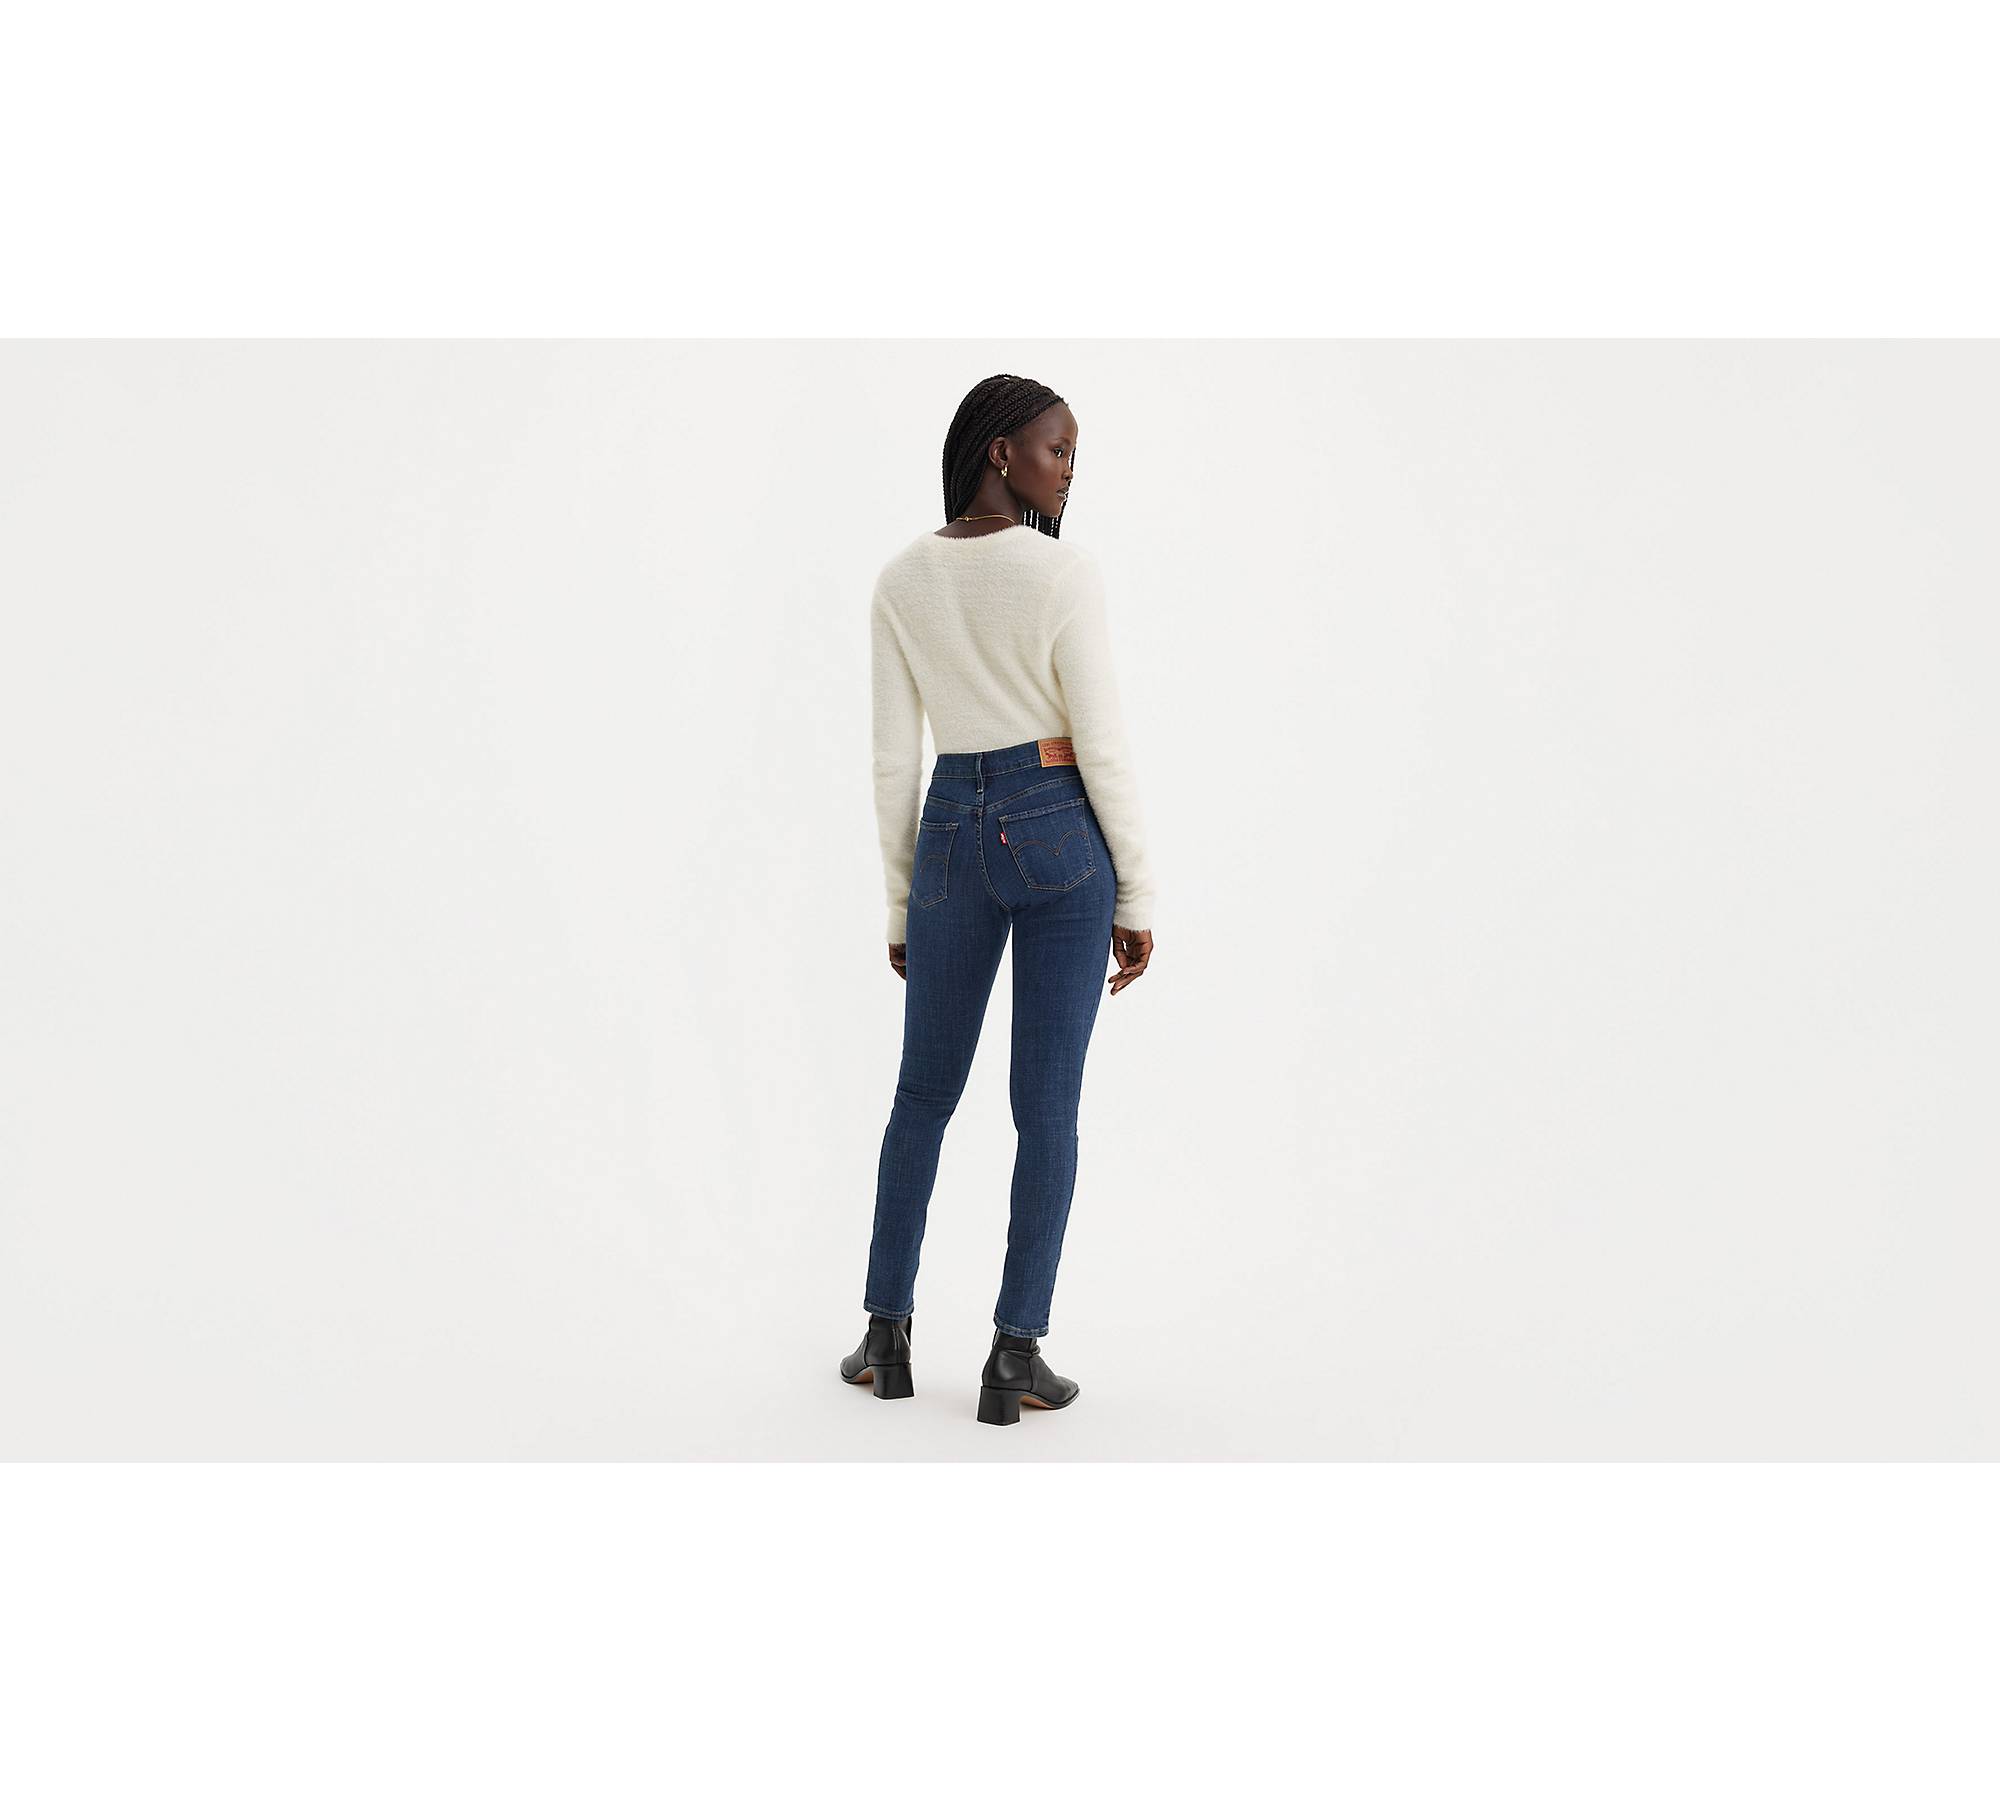 1166 Women's Super High Waisted Skinny Jeans